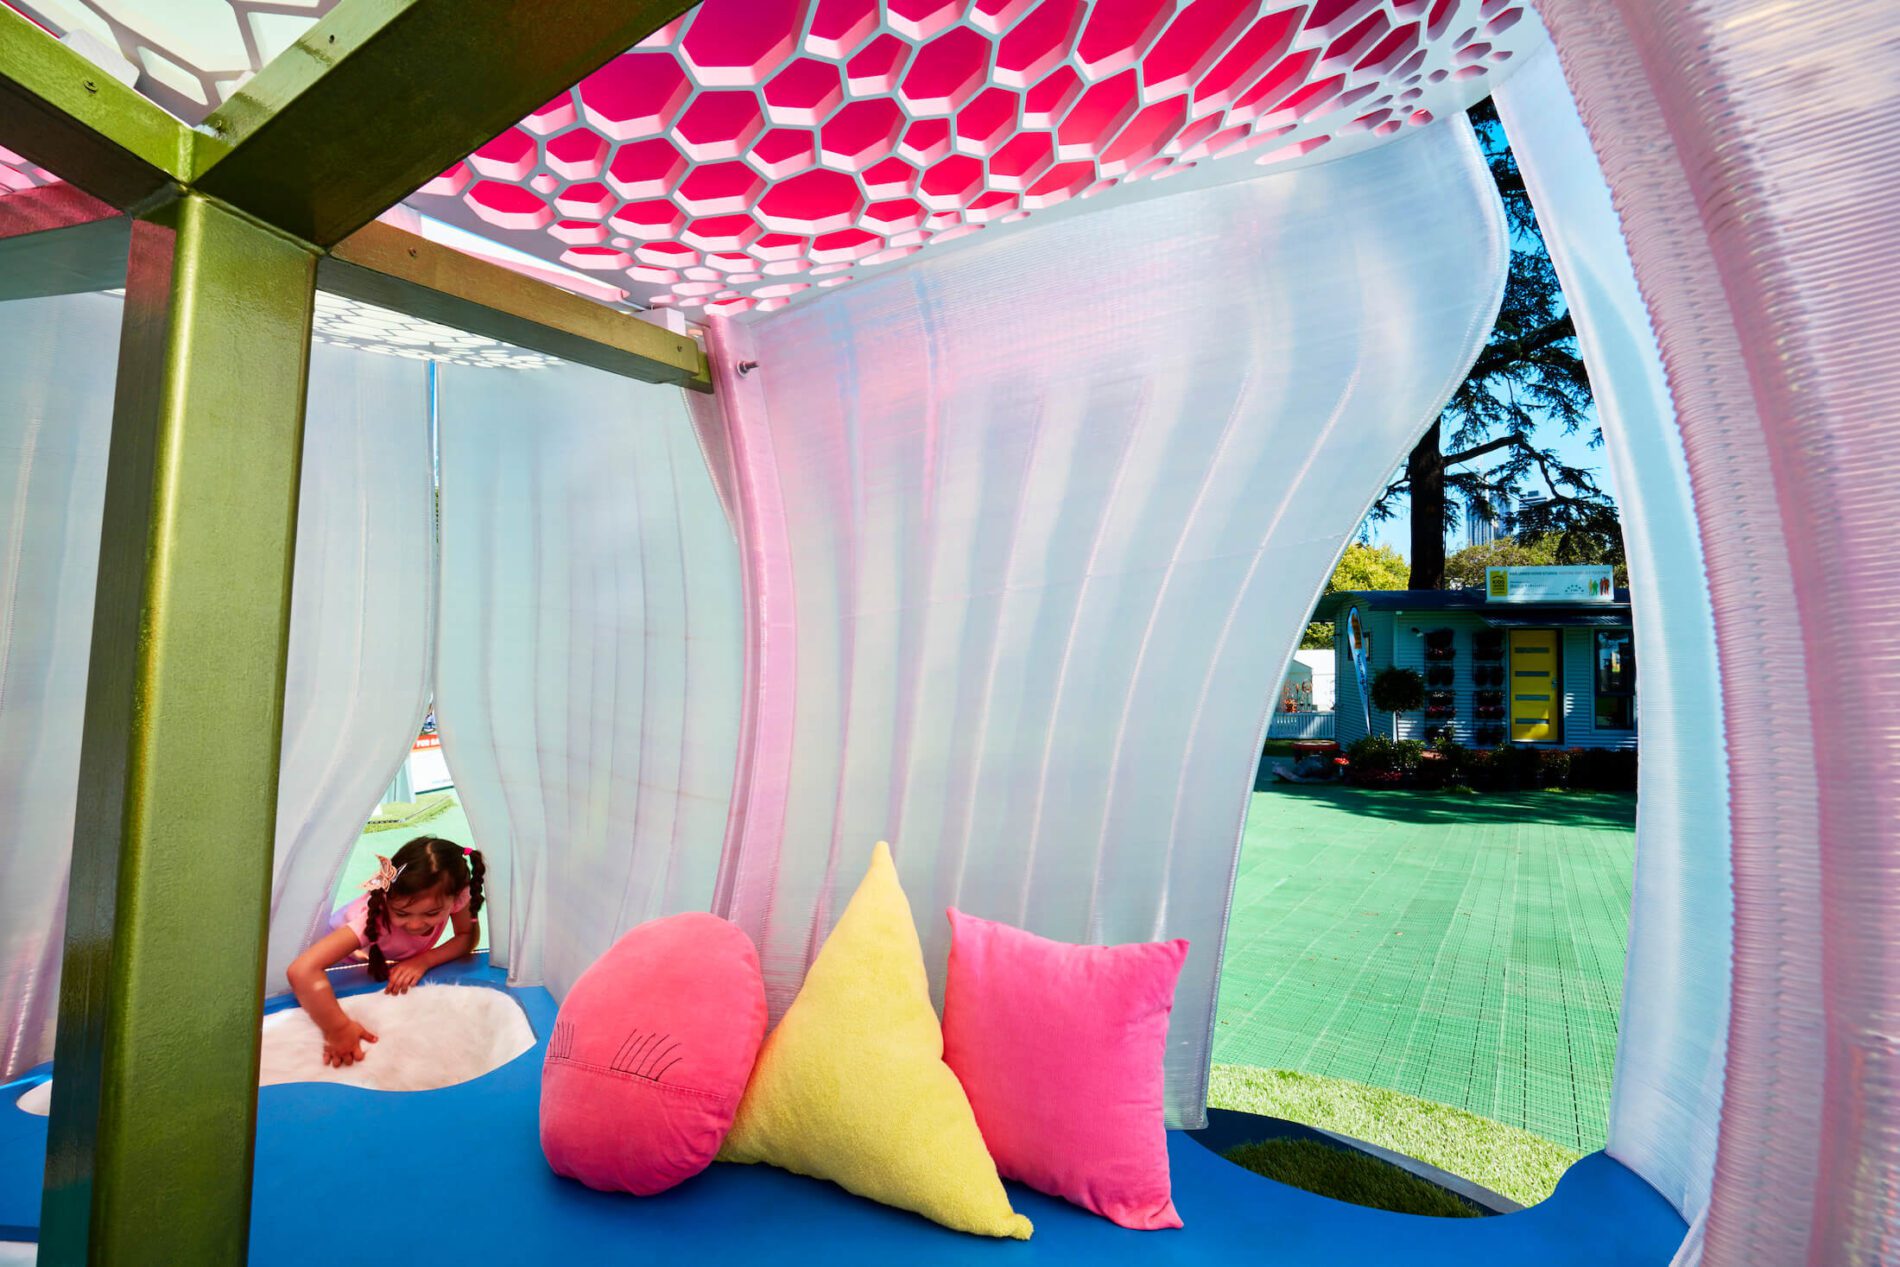 Inside of pink formed structure with soft pink and yellow cushions and playful pink honeycomb ceiling